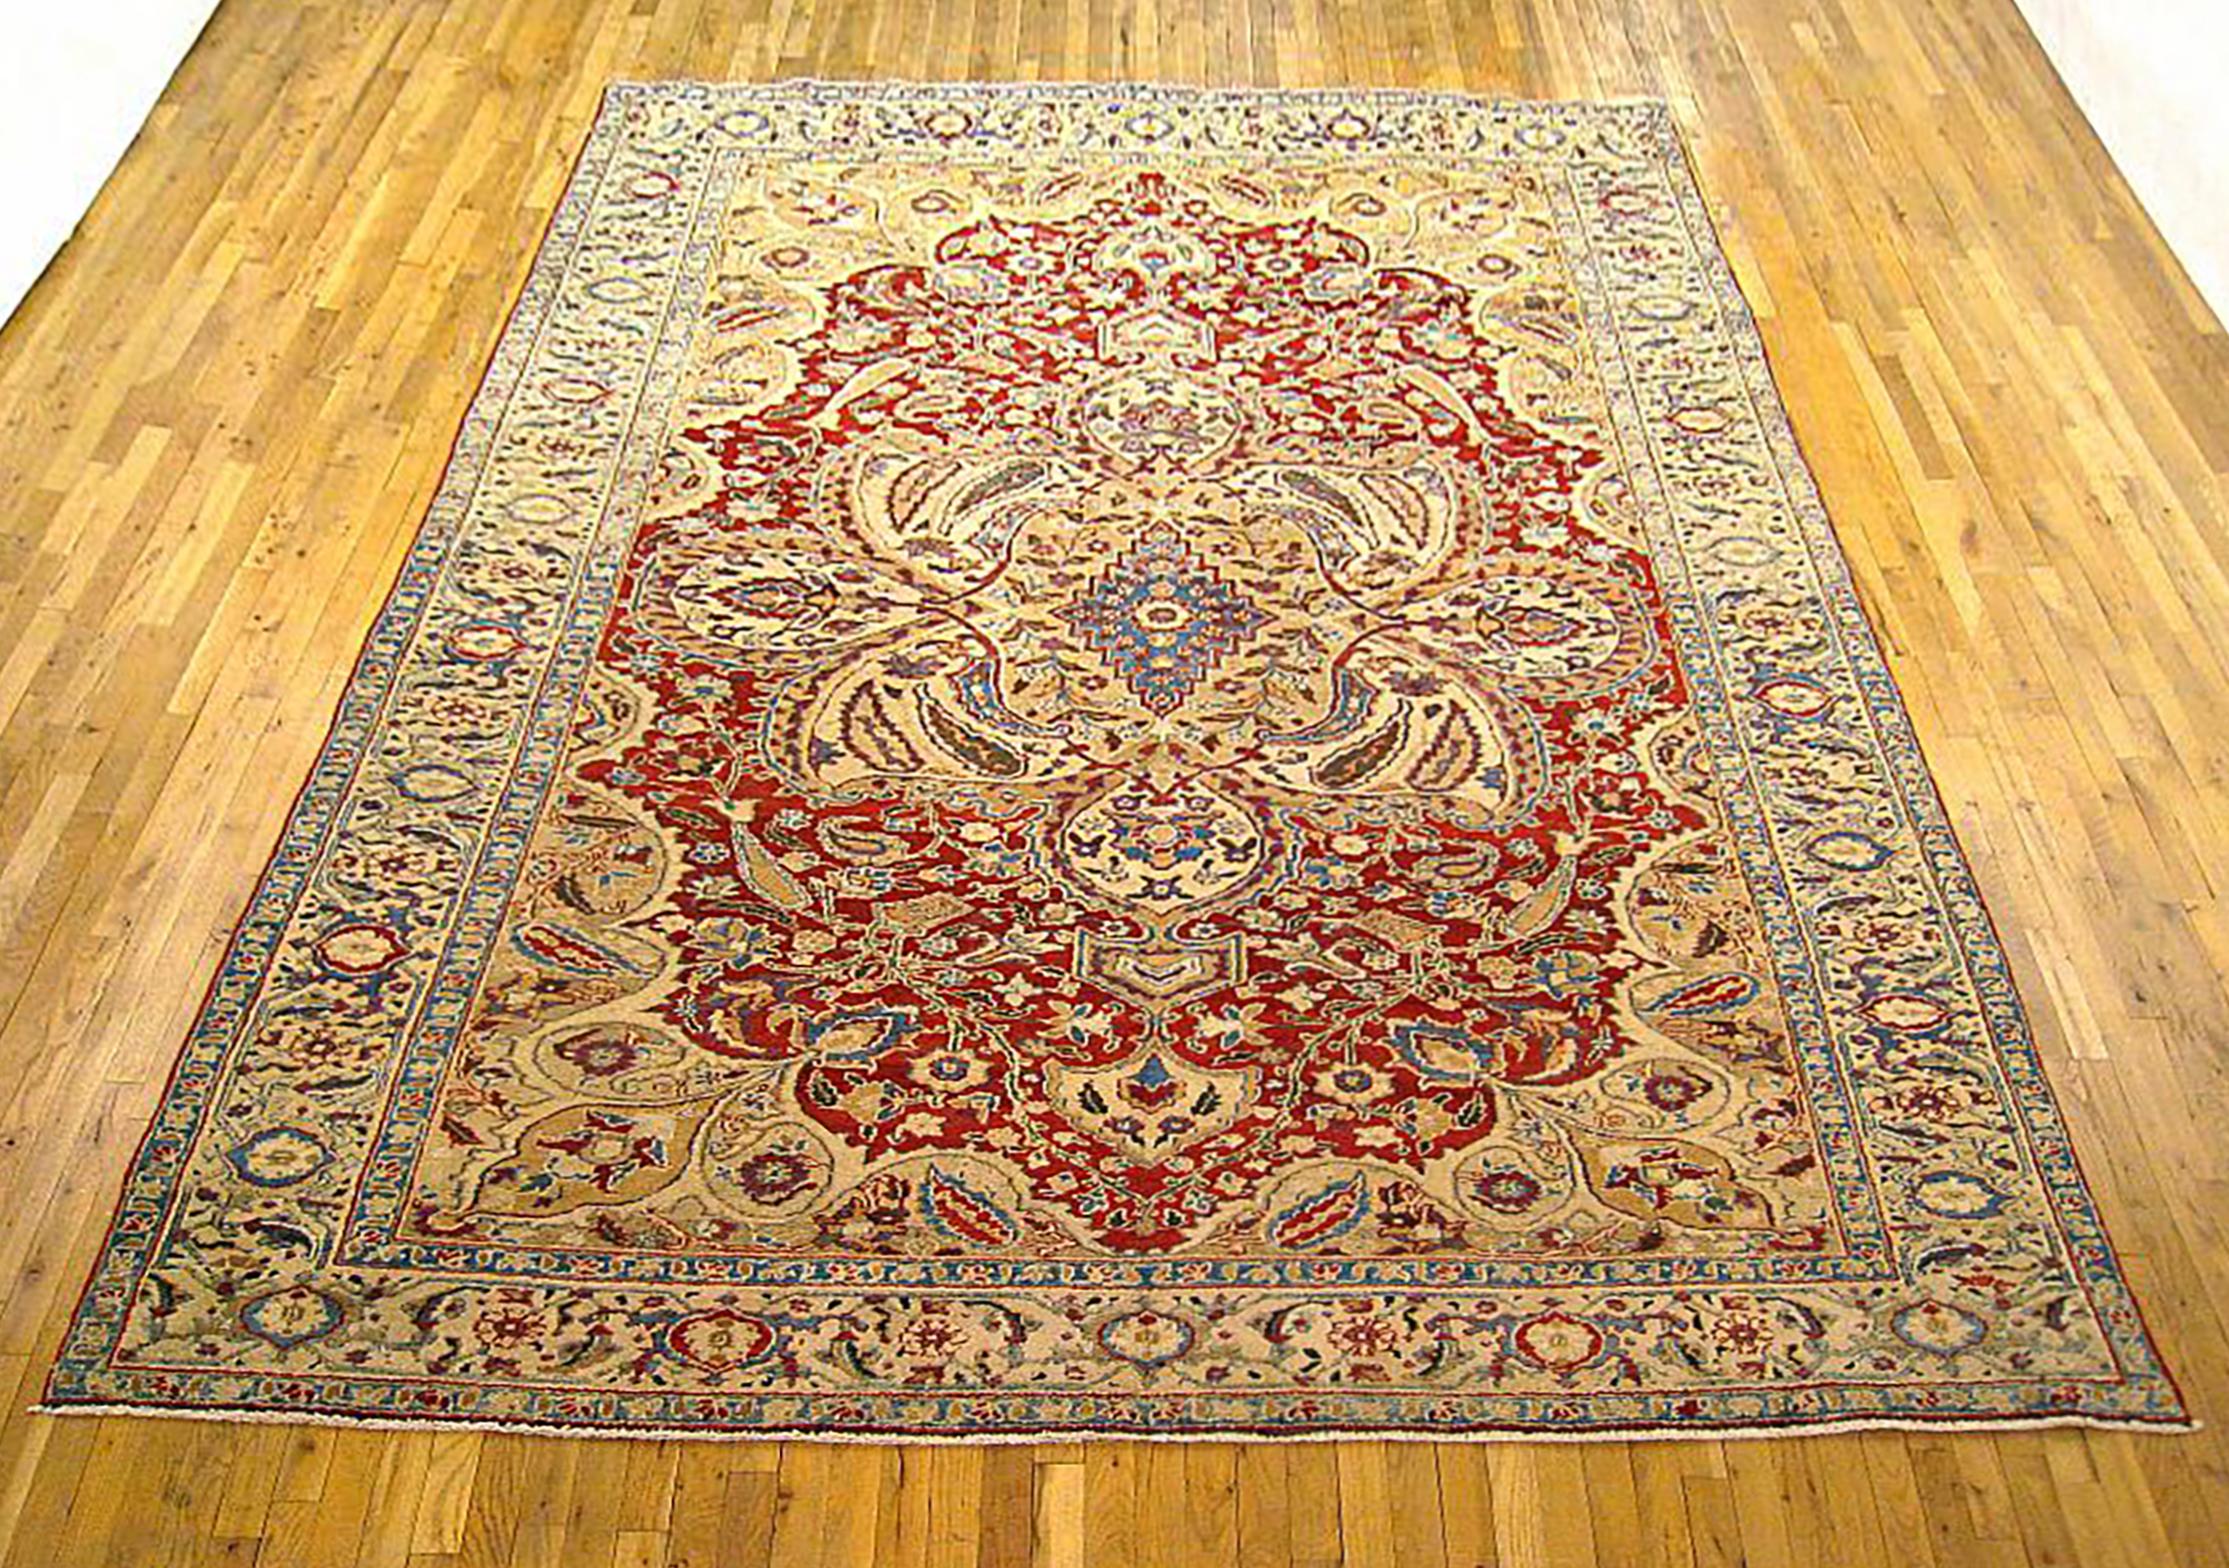 Antique Persian Heriz Oriental Rug, Room size

An antique Persian Heriz oriental rug, size 12'2 x 8'4, circa 1920.  This handsome hand-woven geometric rug features a central medallion on the soft red field.  The central field is enclosed within an